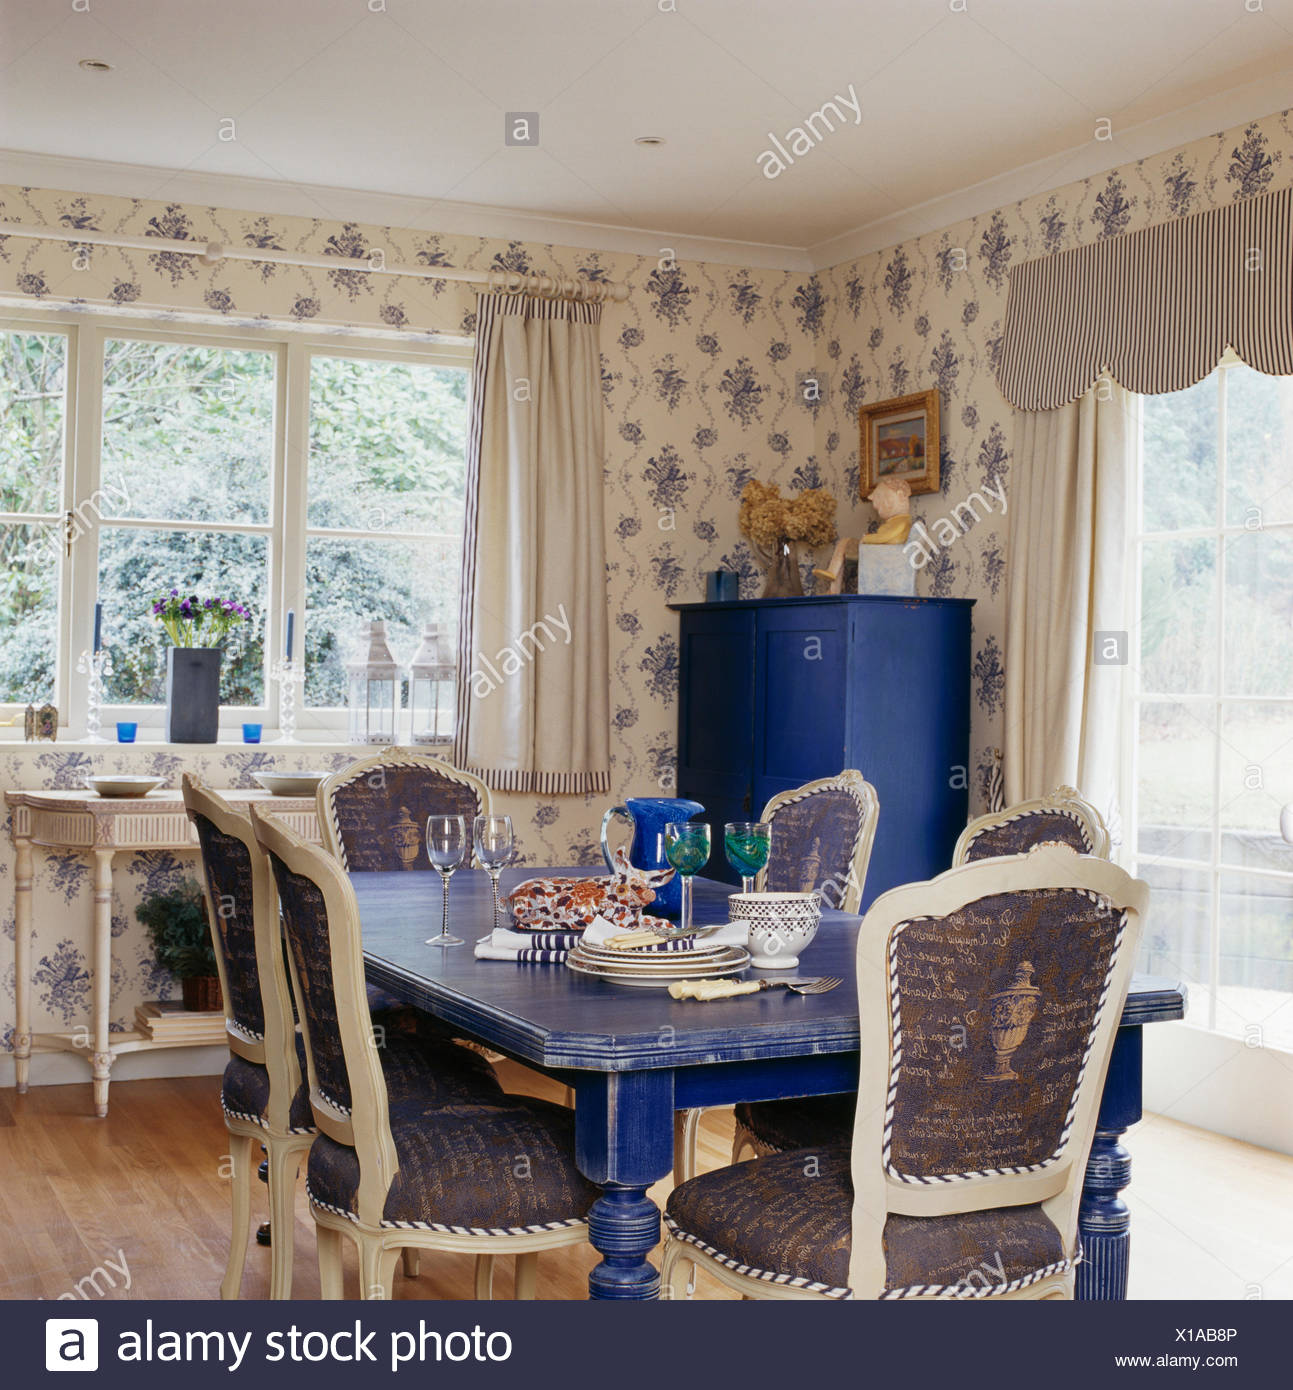 Upholstered White Chairs And Painted Blue Table In Country Dining